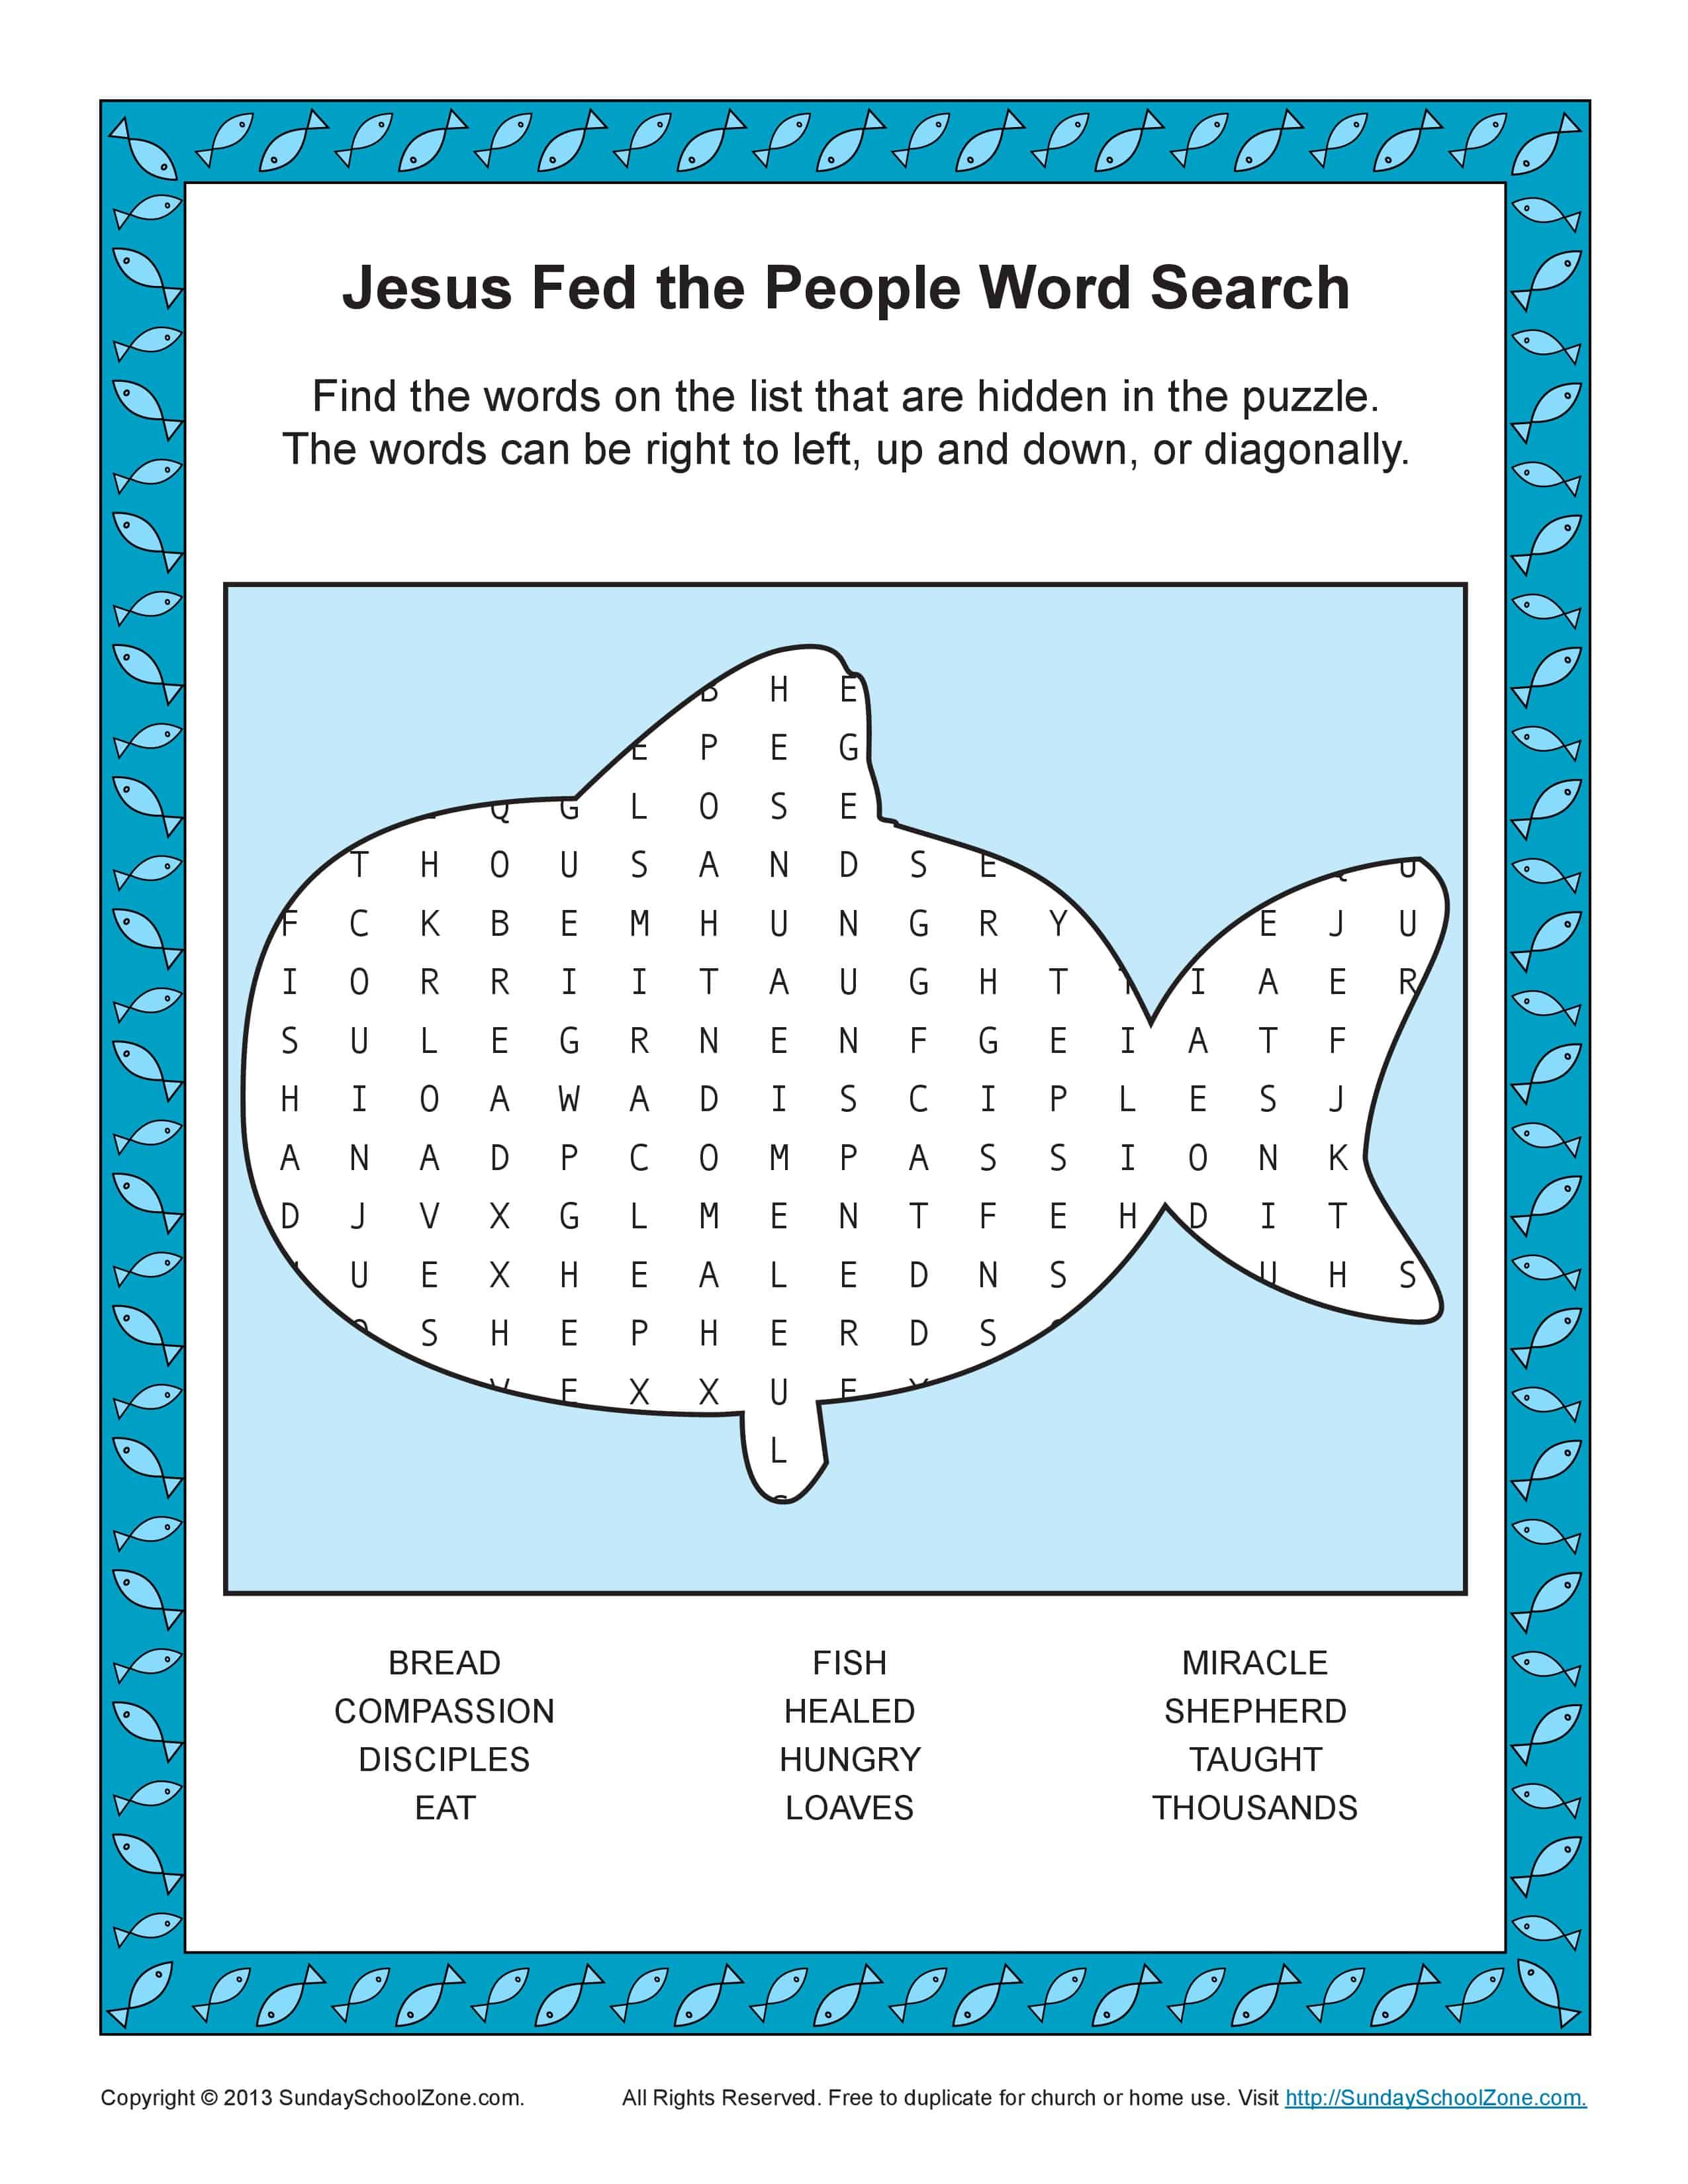 Free, Printable Bible Word Search Activities On Sunday School Zone - Free Printable Sunday School Crossword Puzzles